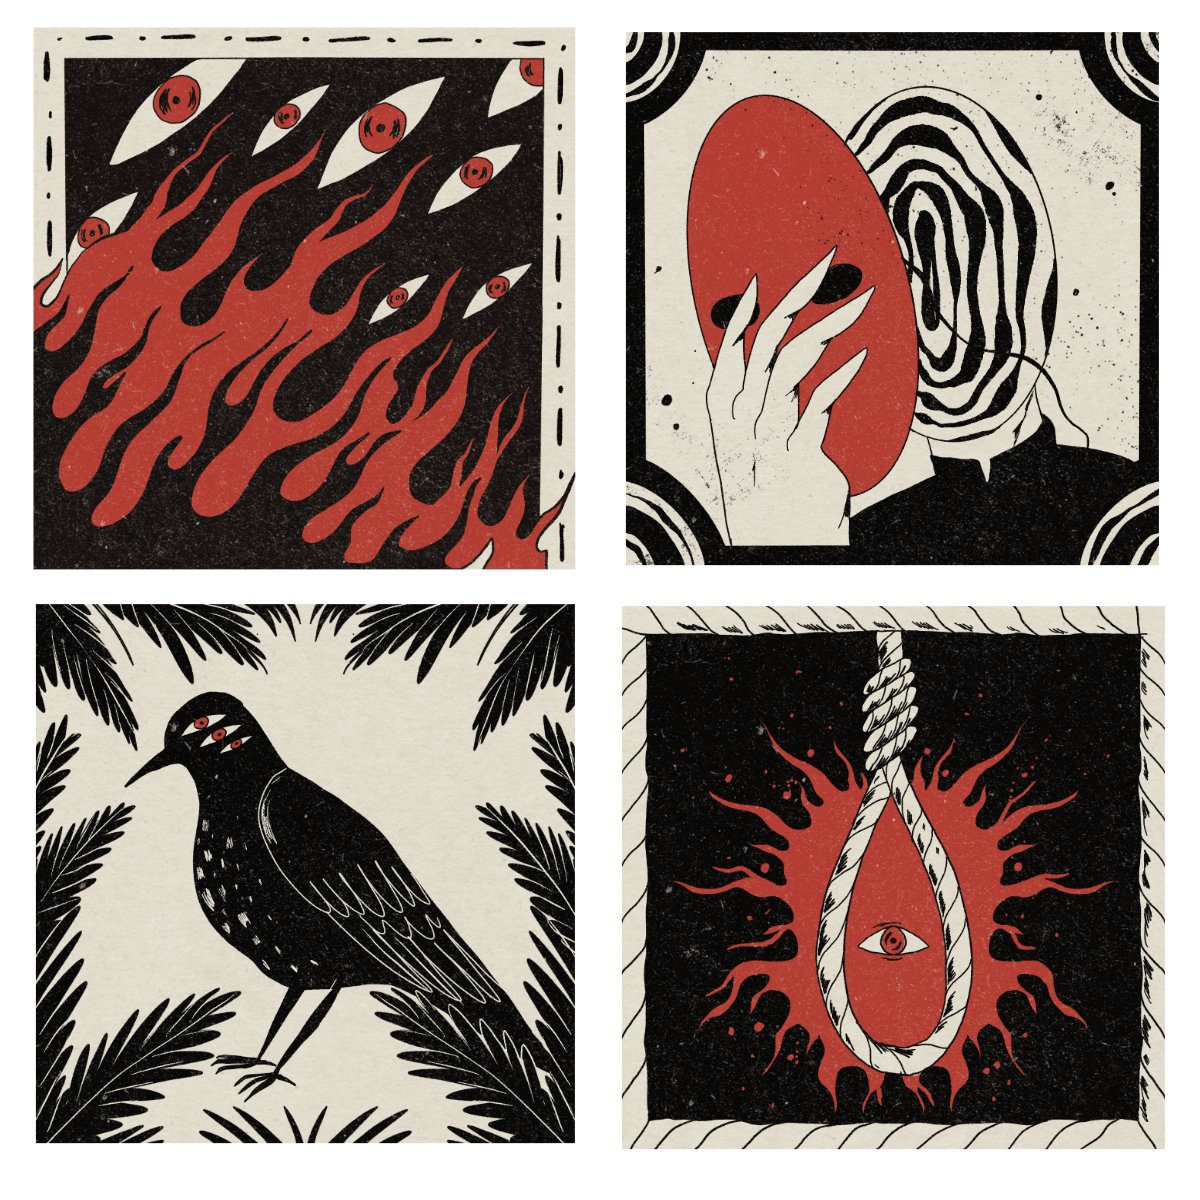 A selection of the many little tiny illustrations I made for @blackbirdsrpg ✨

super excited for this one to come out this summer! these were so much fun. @AMUTTRPGS 